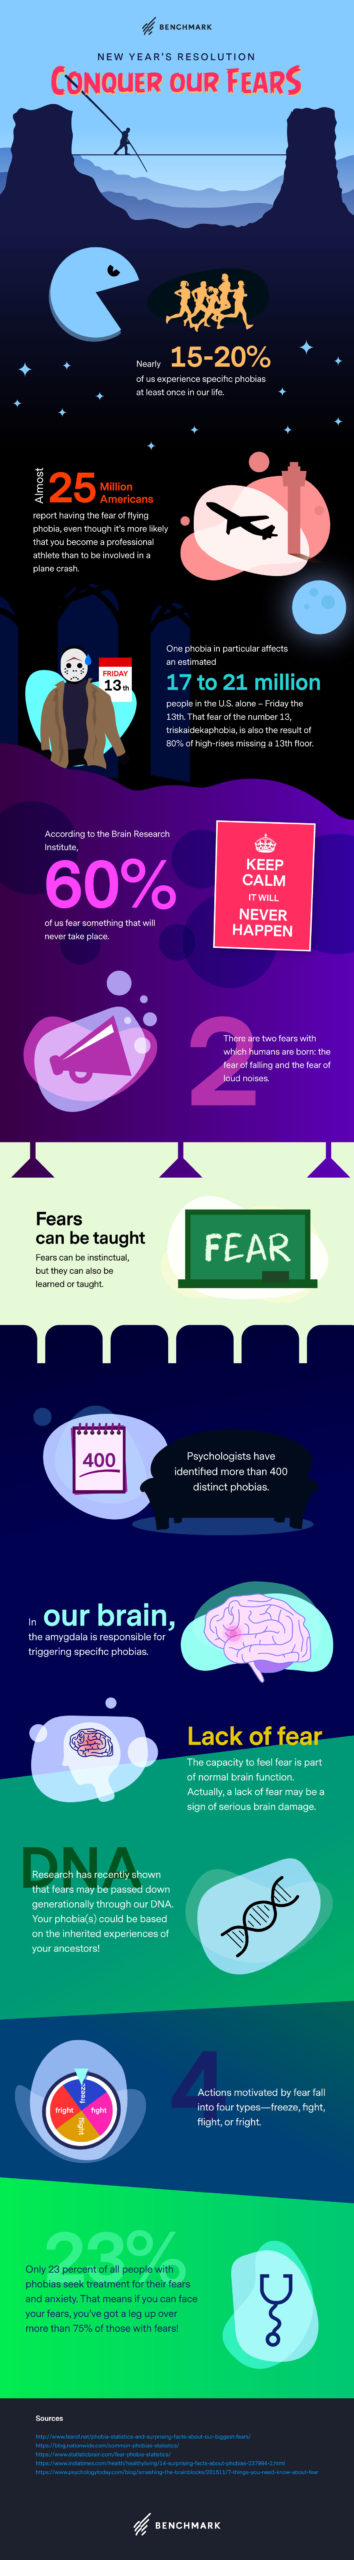 Infographic: Conquering Our Fears